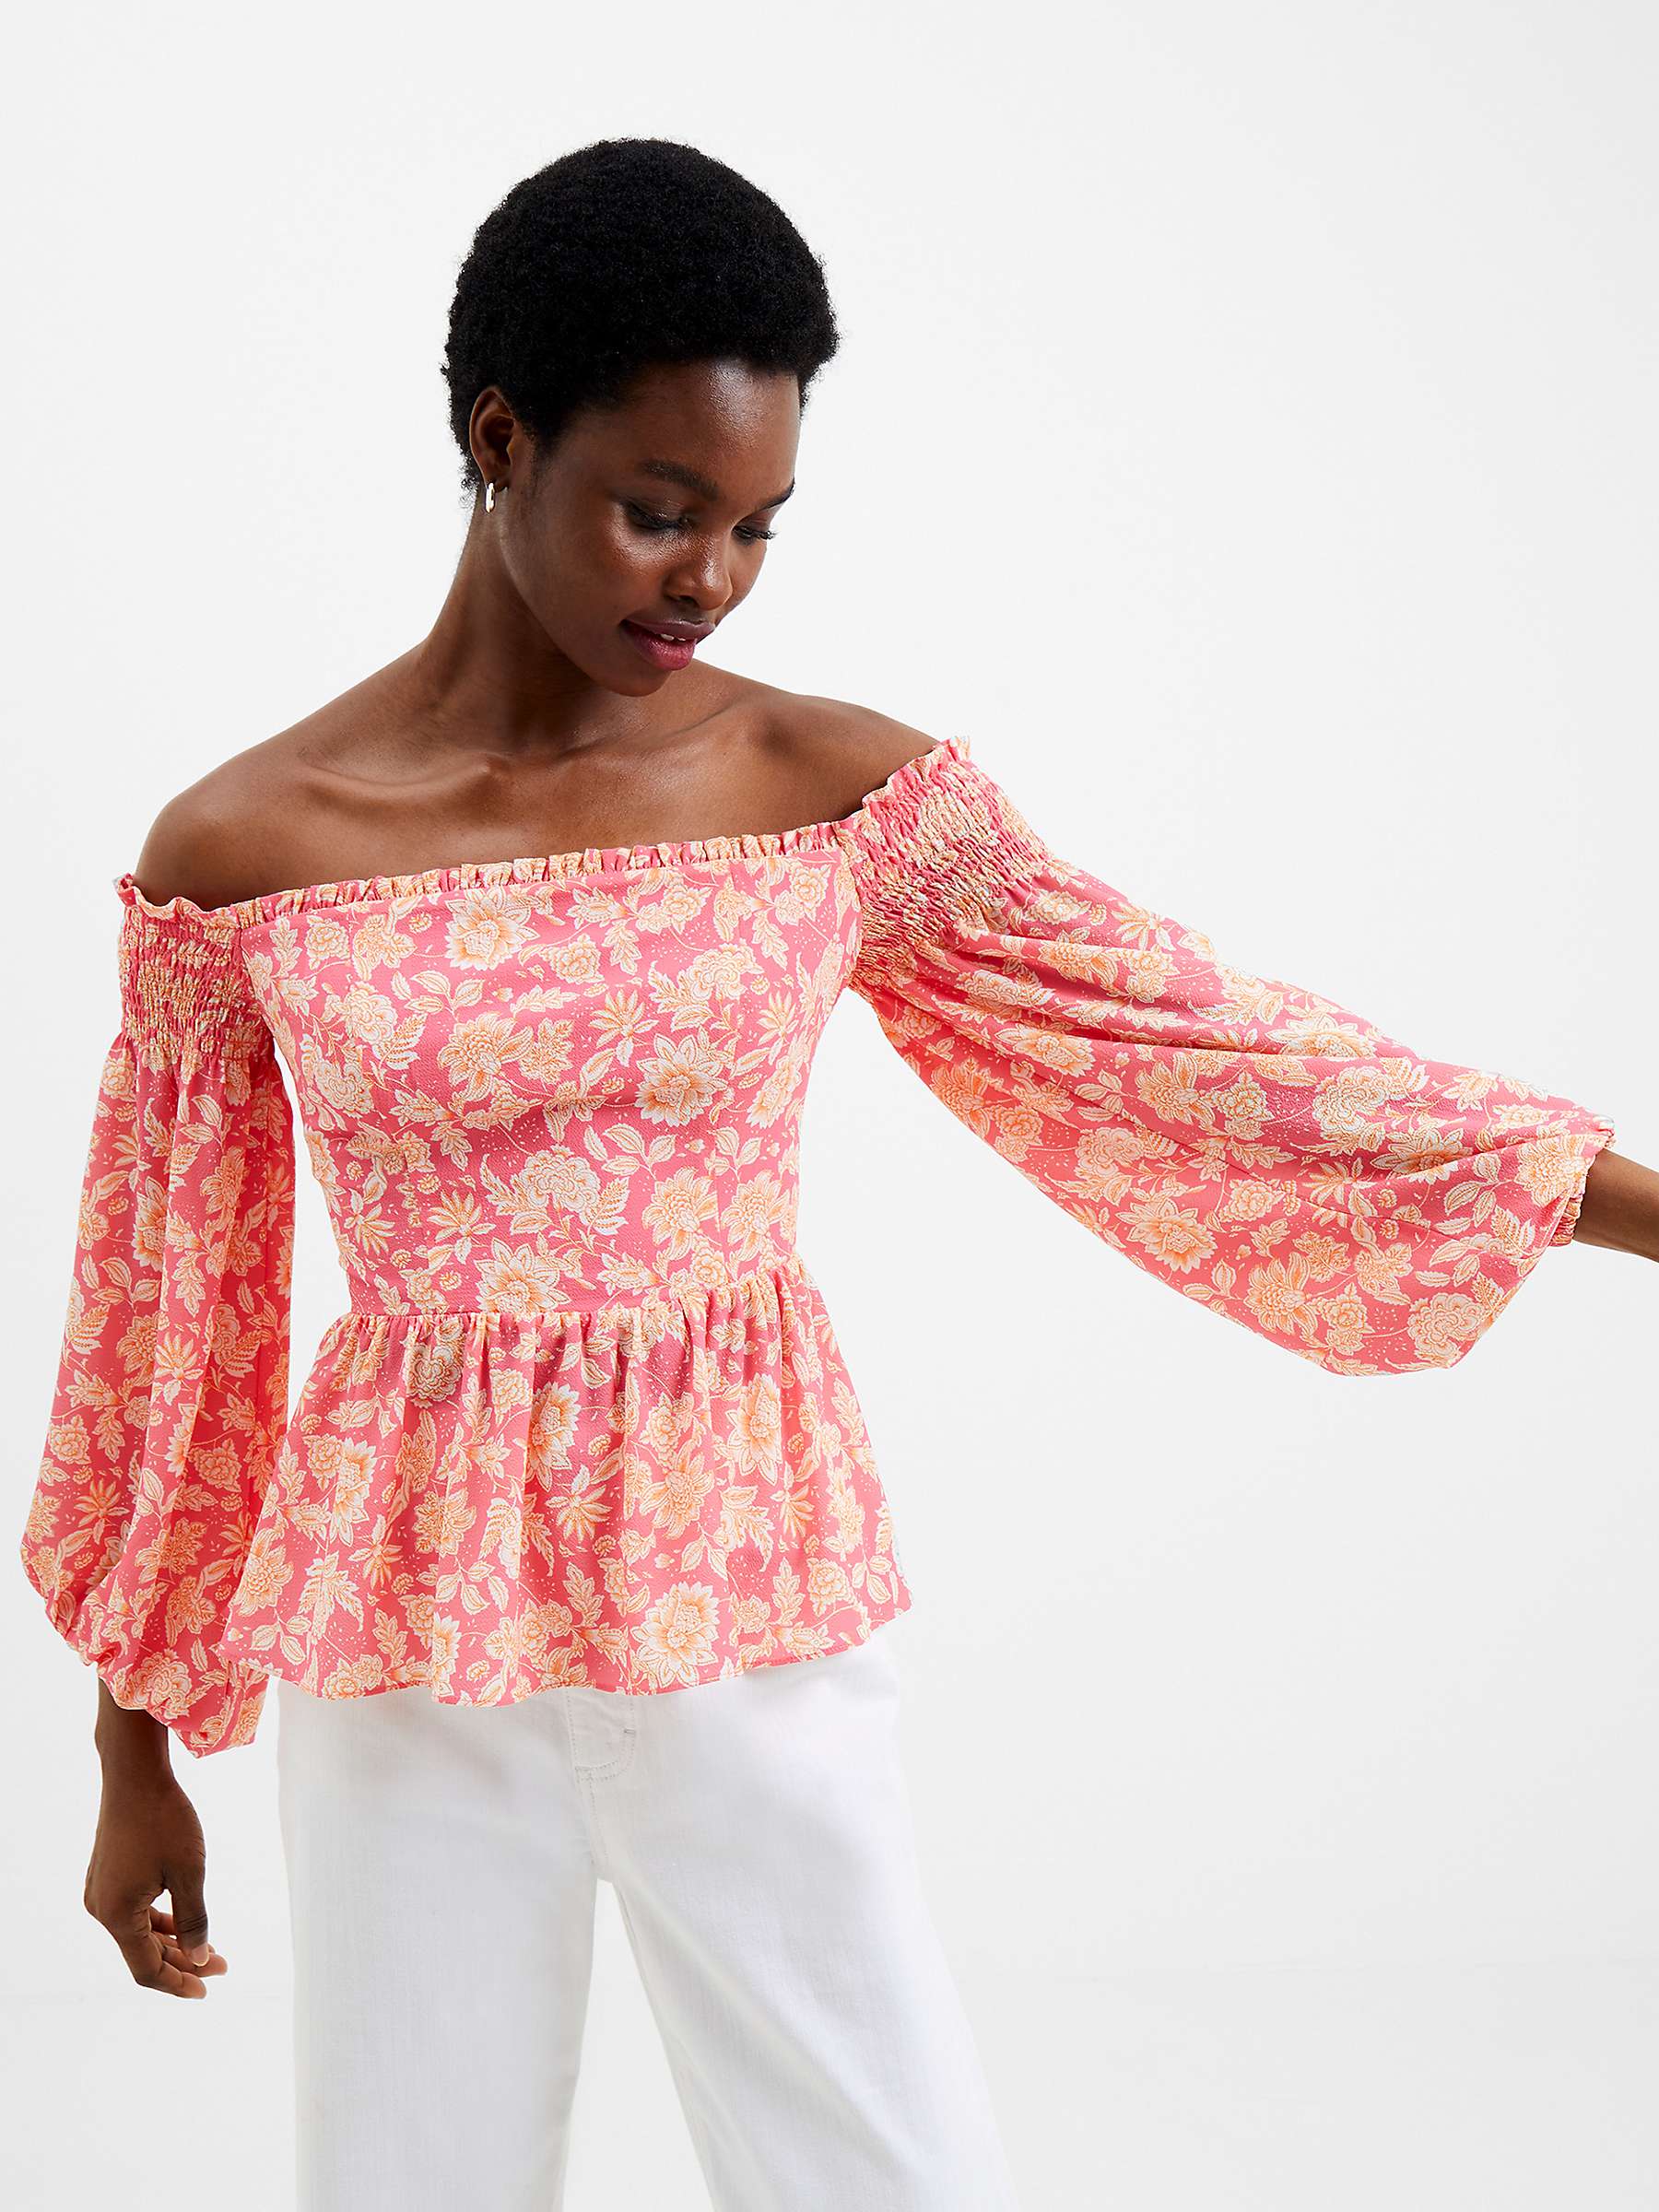 Buy French Connection Cosette Verona Smocked Bardot Peplum Top, Pink/Multi Online at johnlewis.com